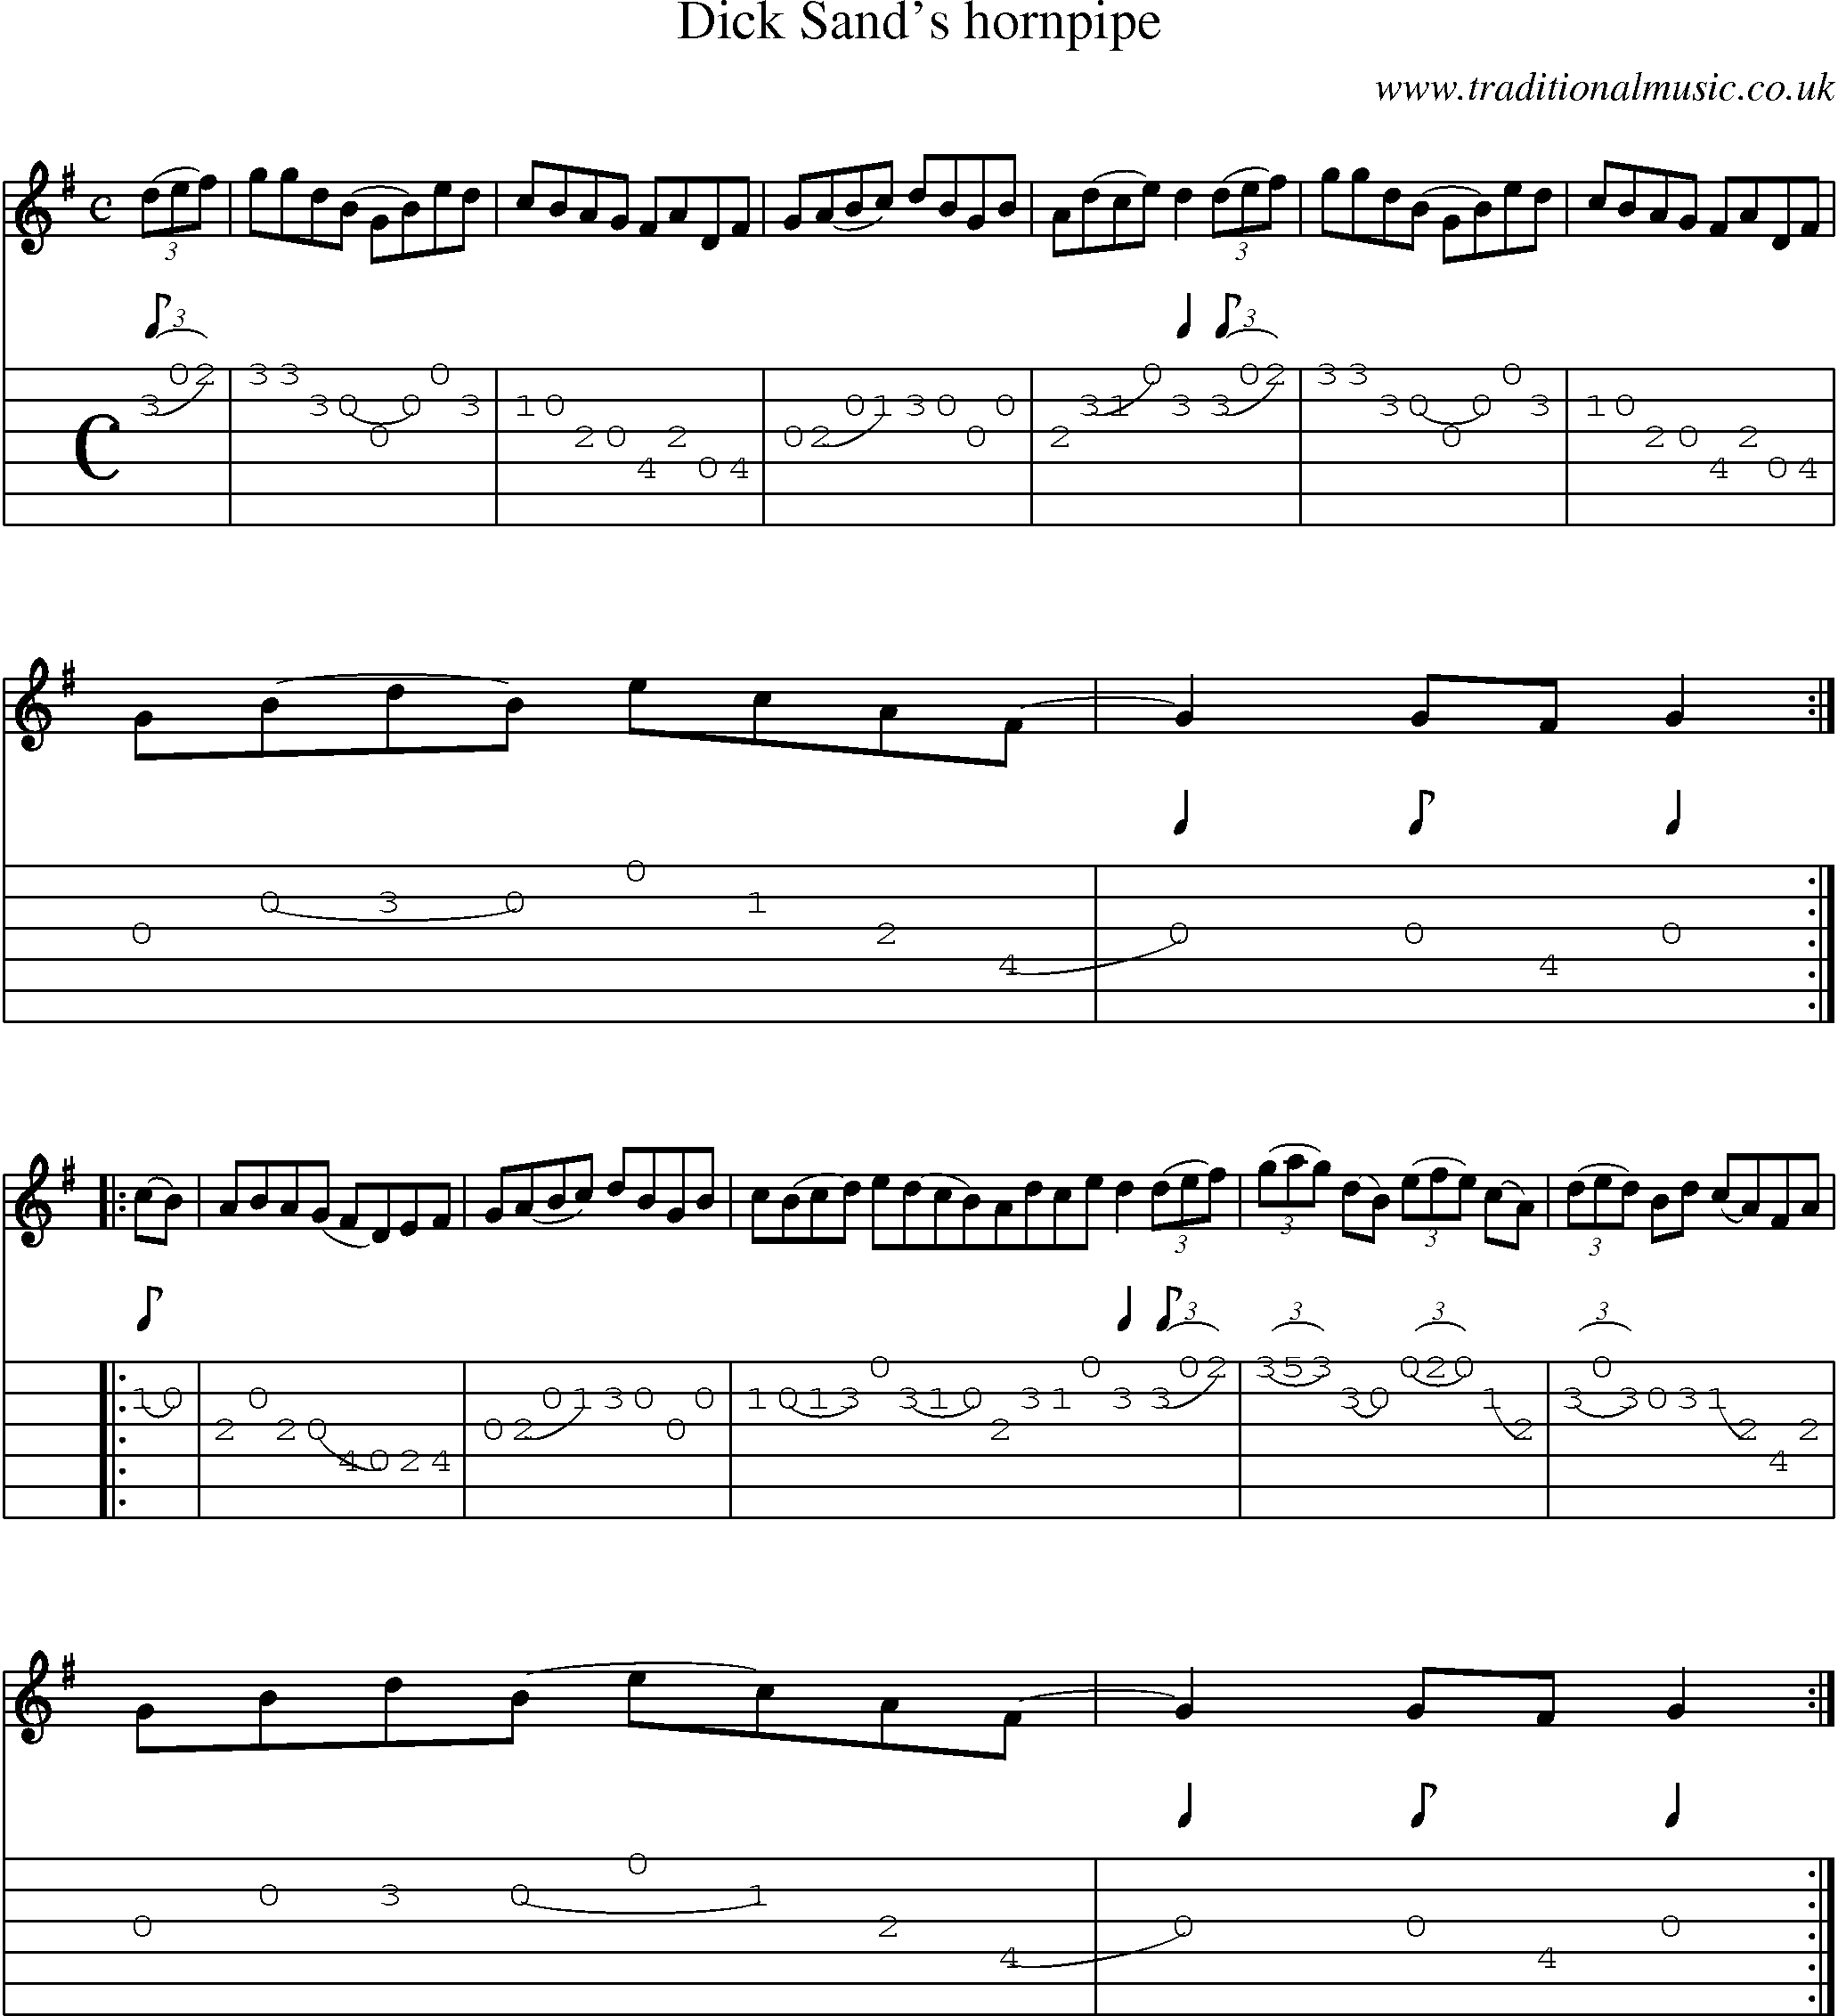 Music Score and Guitar Tabs for Dick Sands Hornpipe